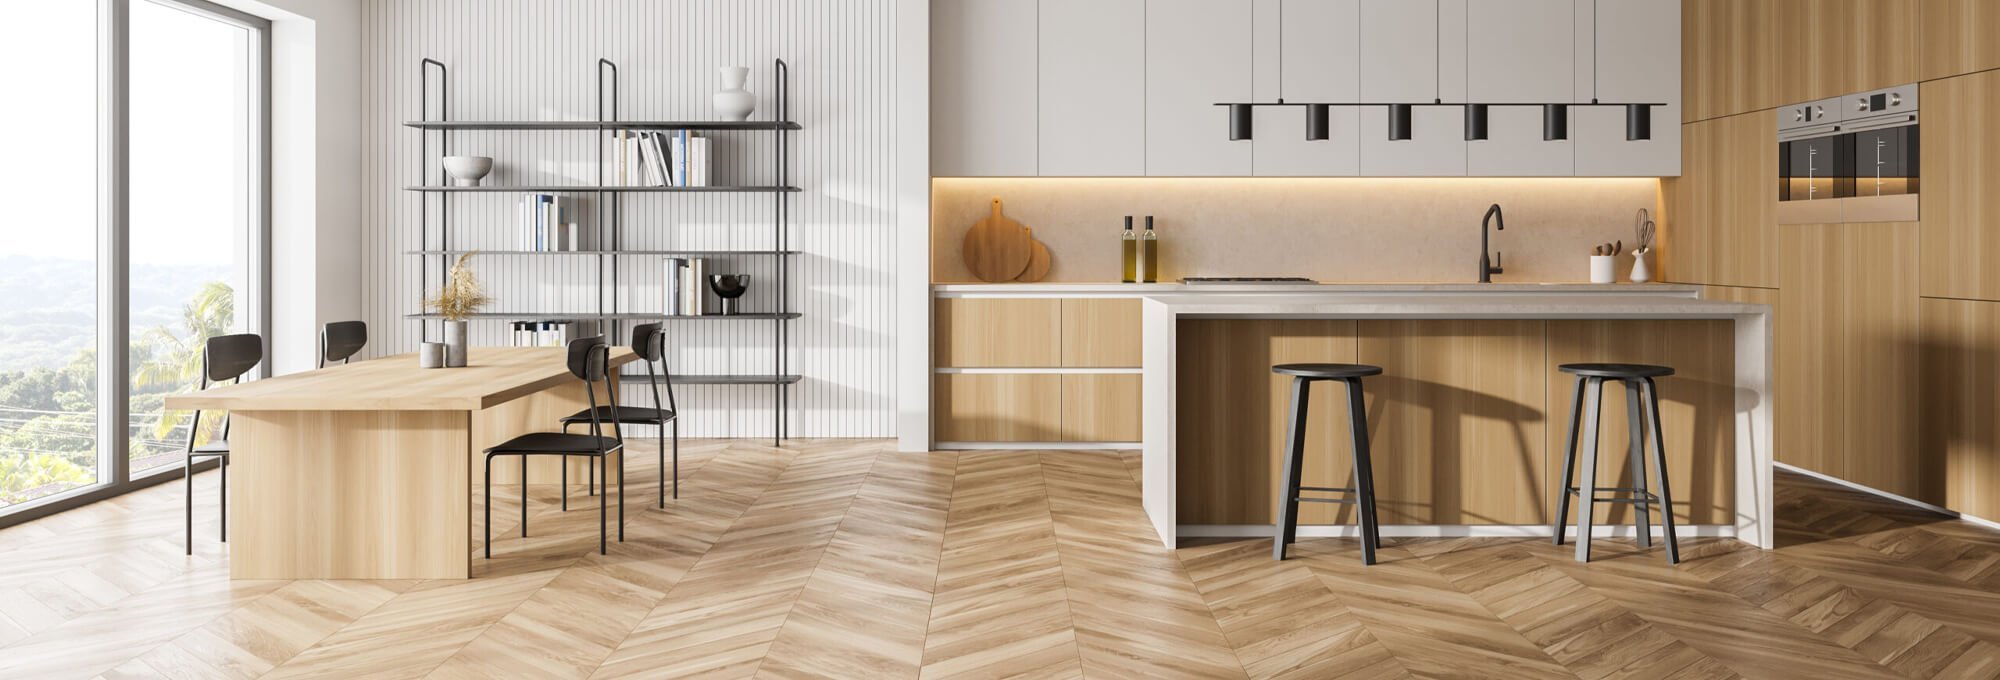 Shop Flooring Products from Prestige - Brighton Floors in Hove